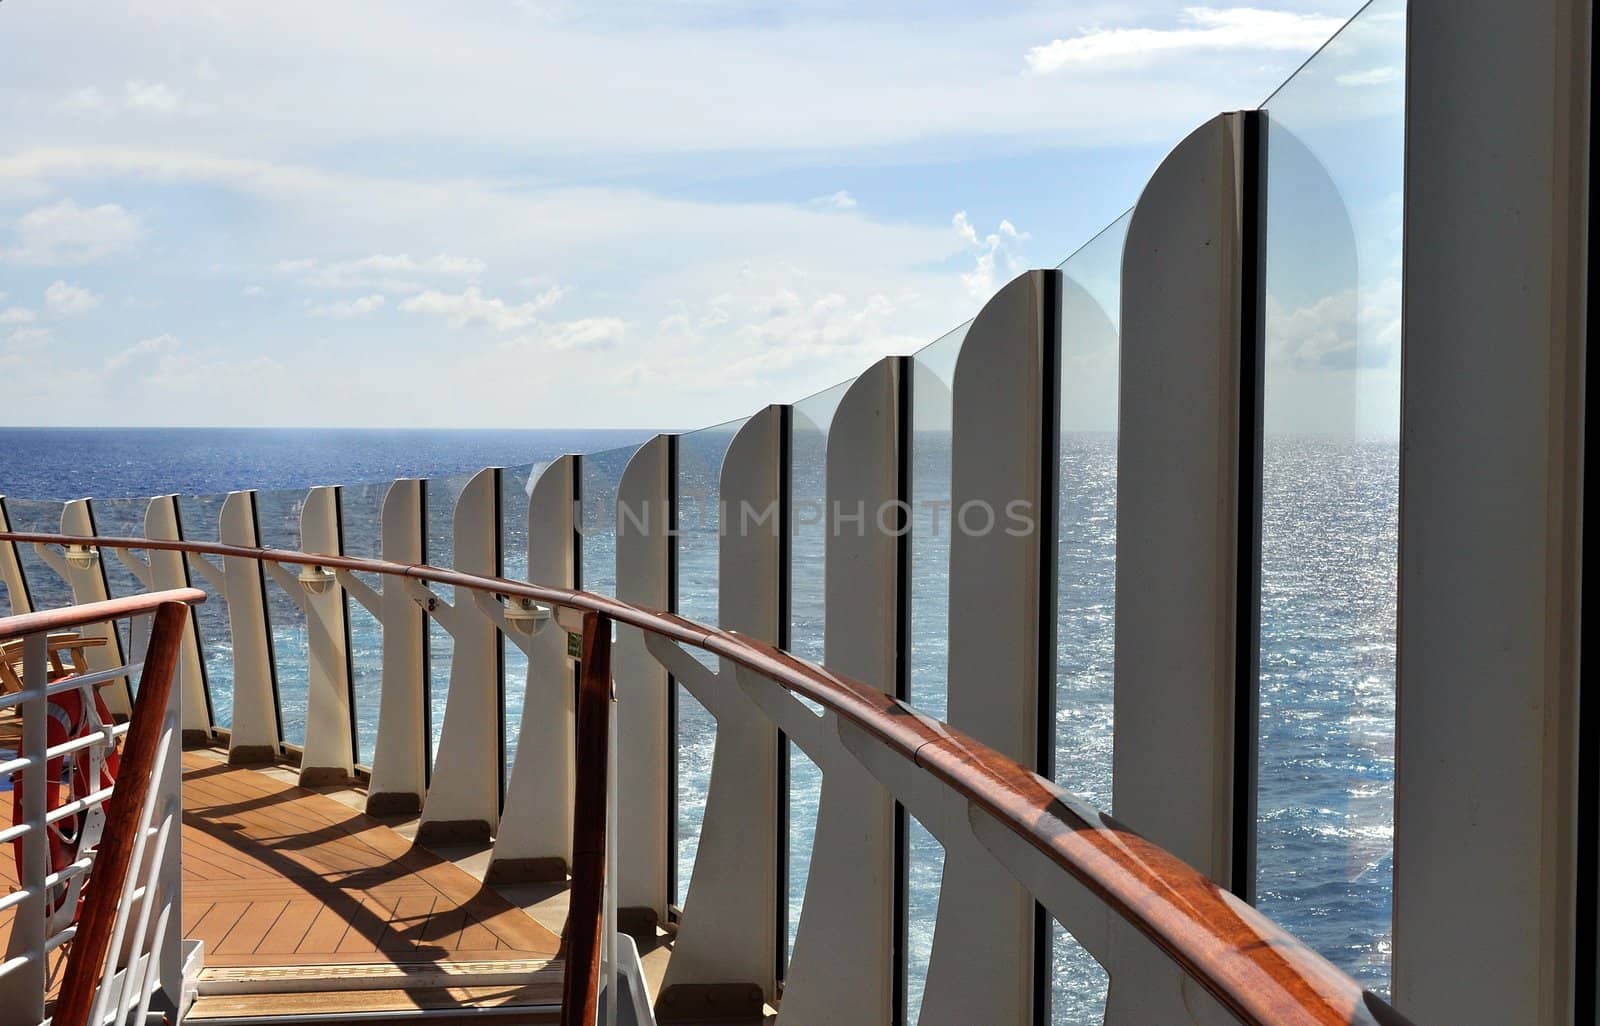 View of a cruise ship deck sweeping around a ship's ladder near the stern.